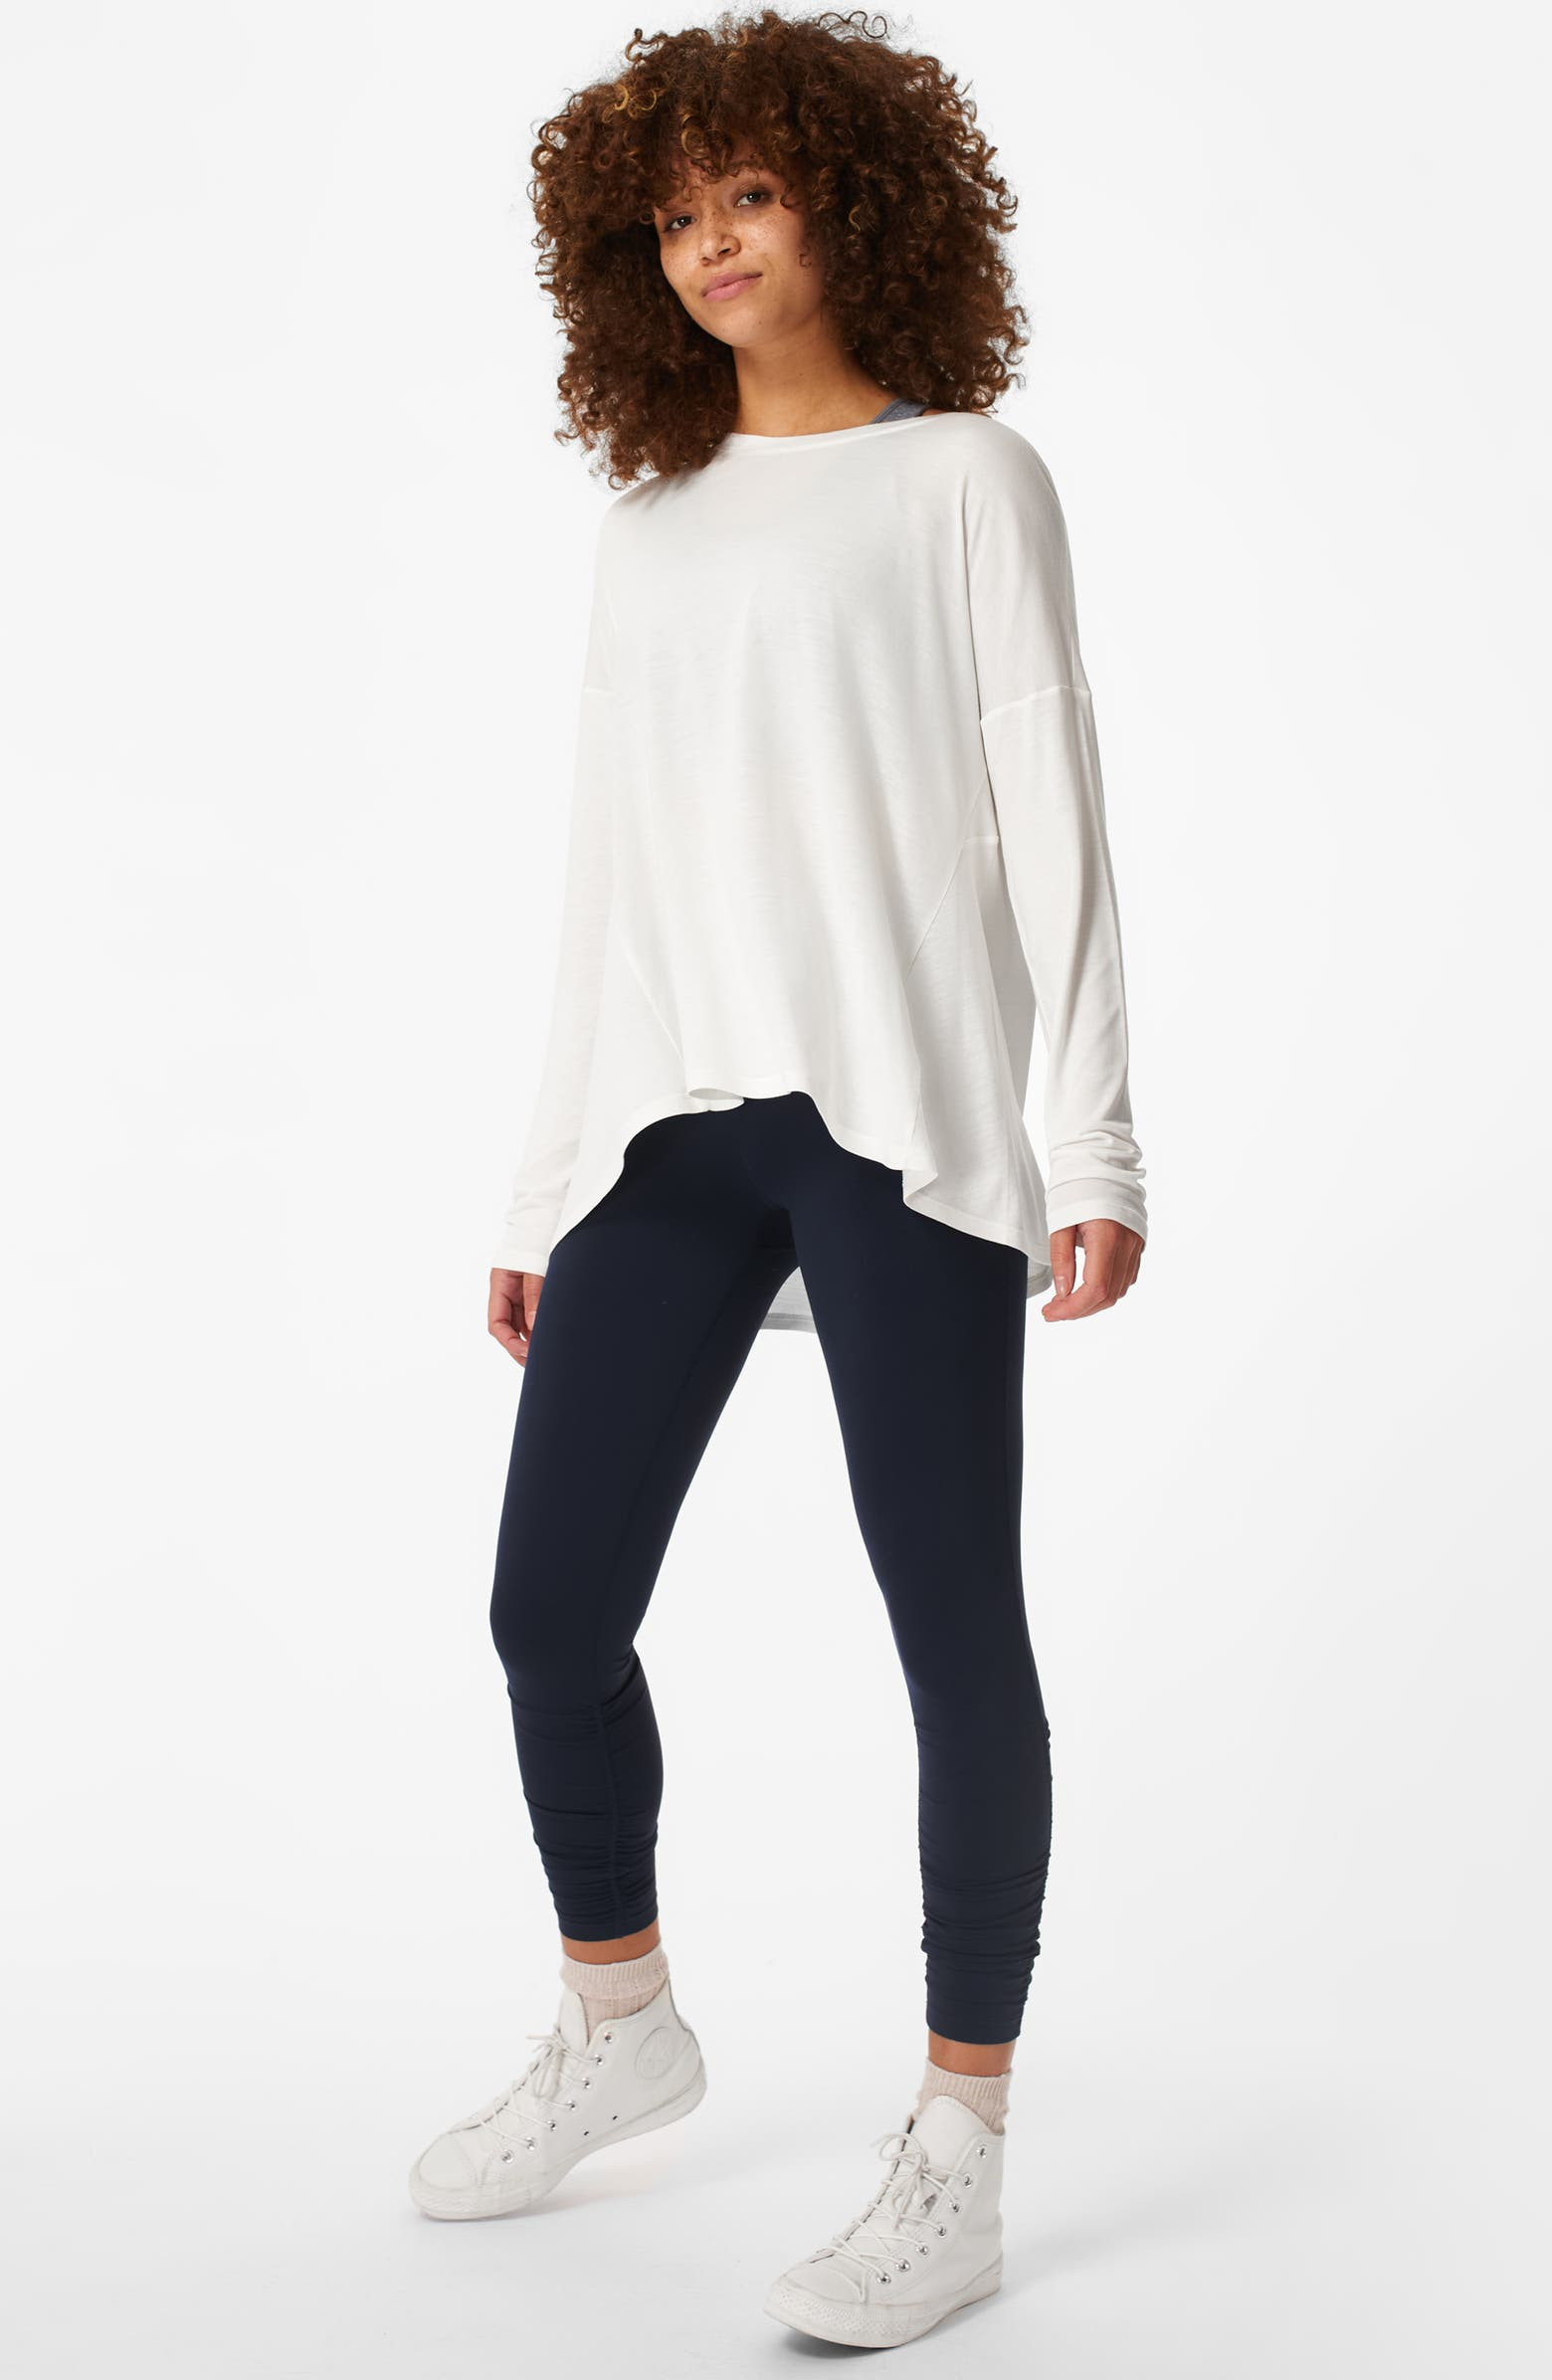 5 Cute Long Shirts to Wear With Leggings this Spring/Summer -